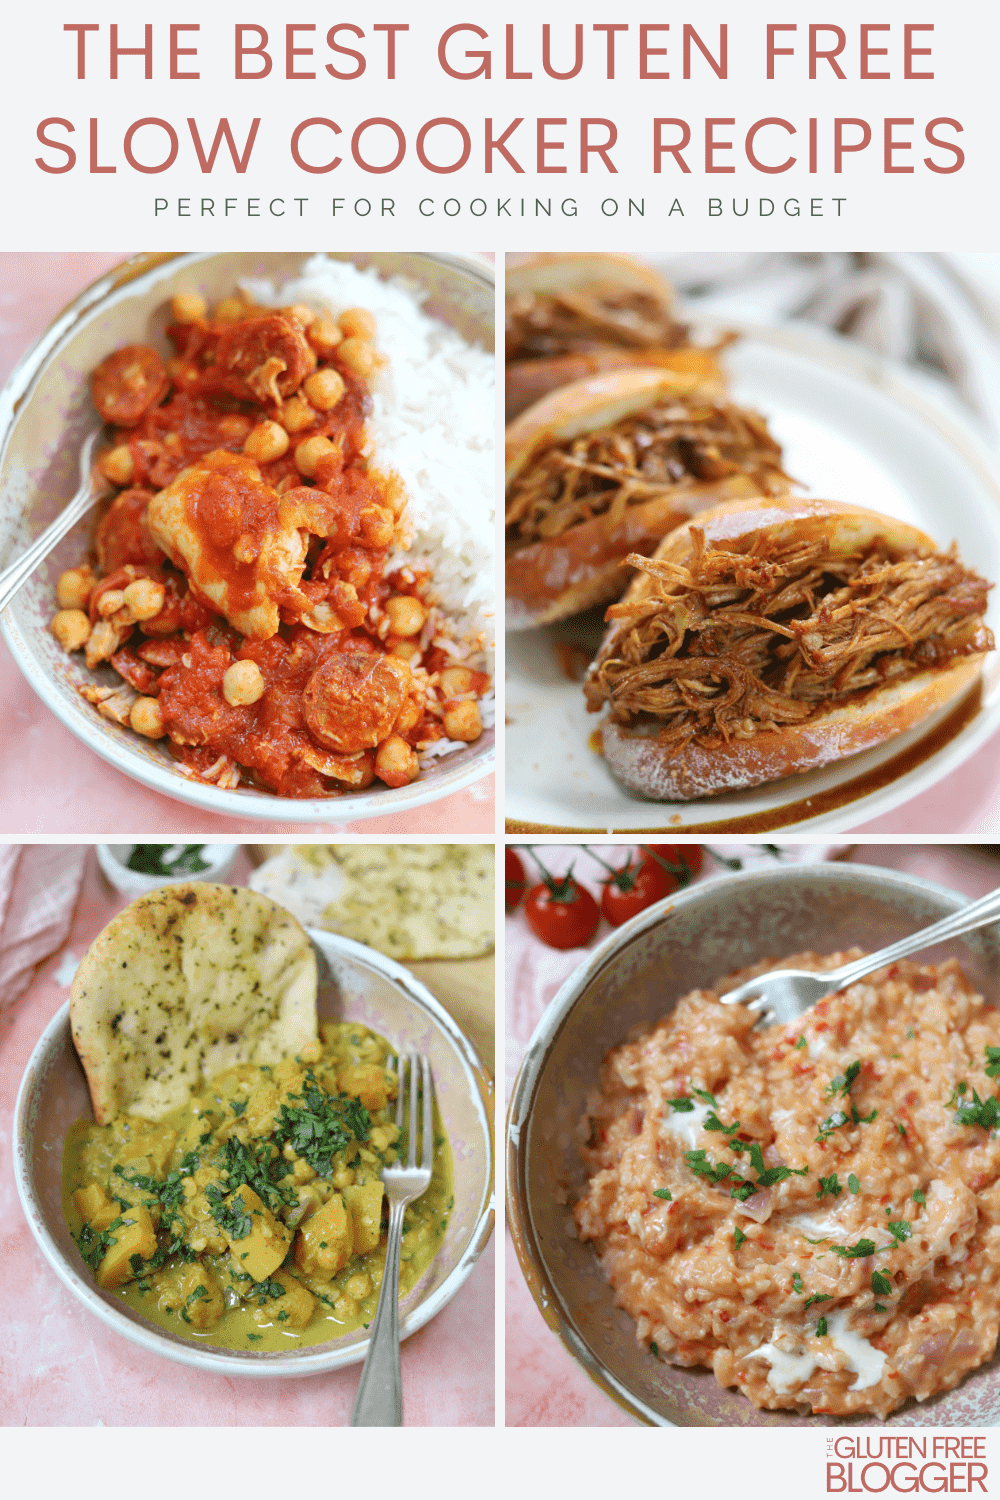 GLUTEN FREE SLOW COOKER RECIPES